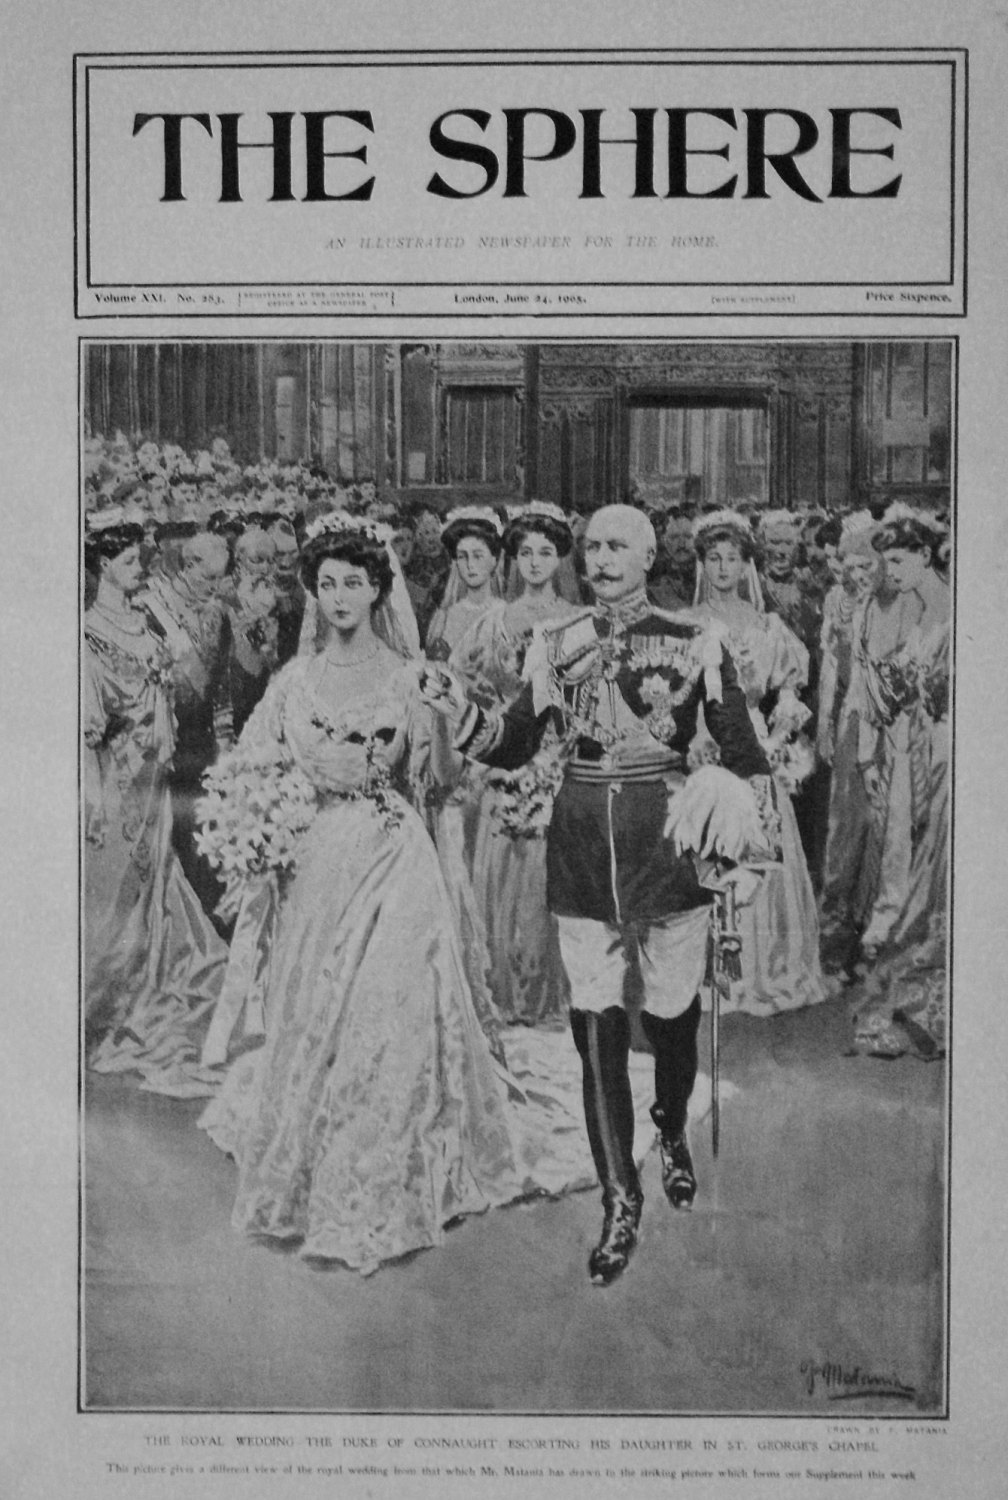 Royal Wedding - The Duke of Connaught Escorting his Daughter in St. George'